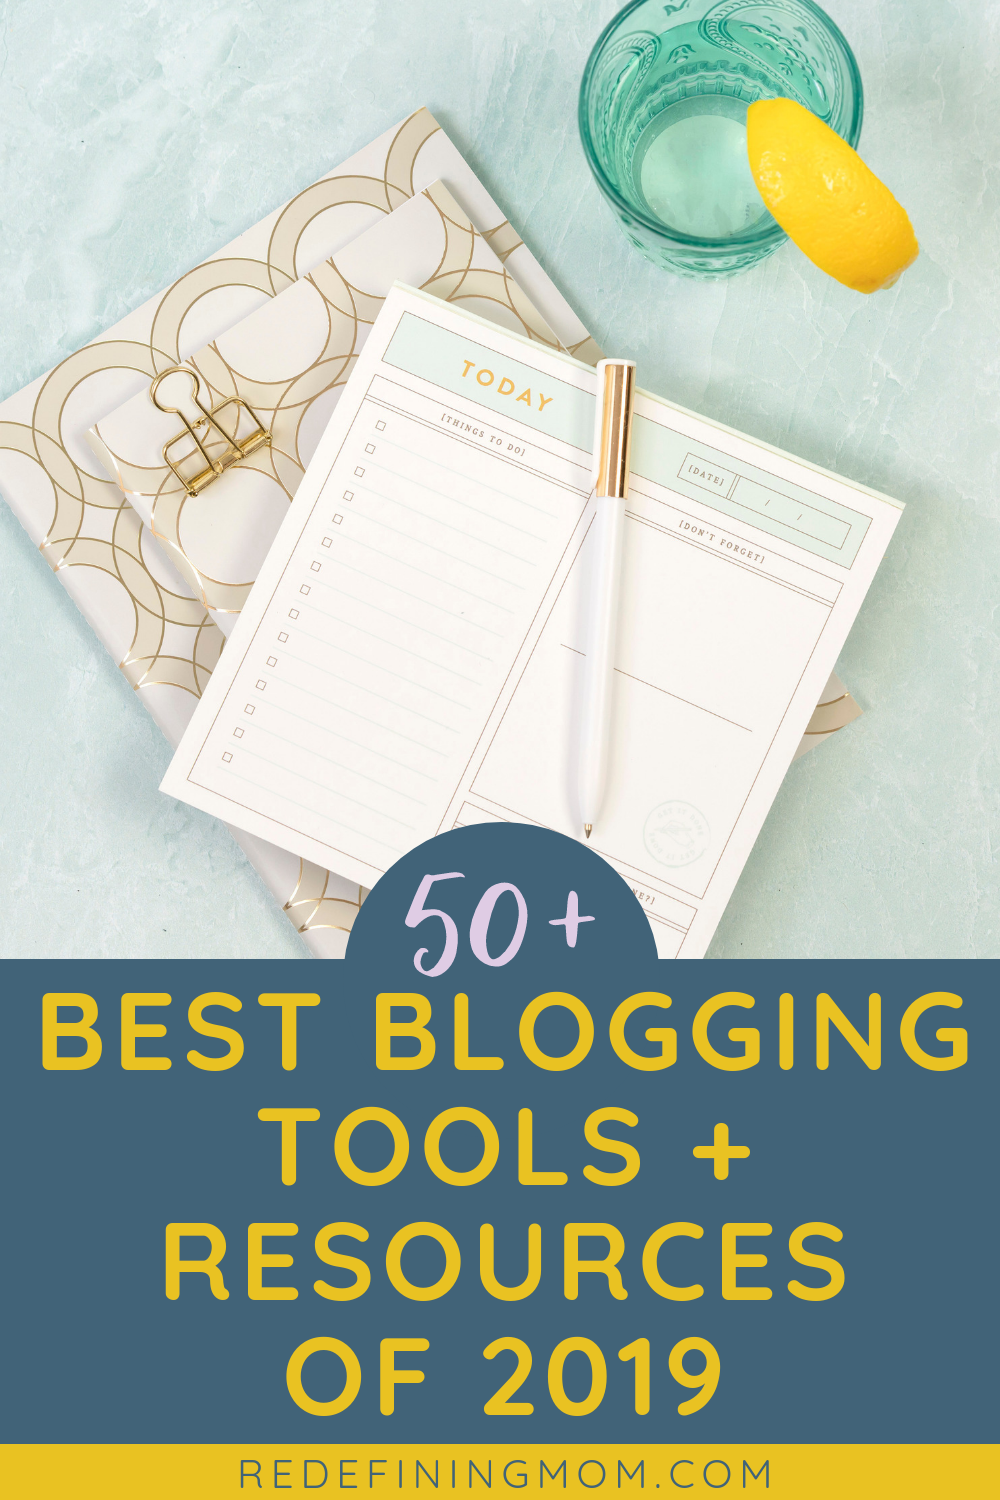 50+ of the best blogging resources & tools for running a successful blog! Learn how to blog and make money from home! Start a blog to make money / Blogging for beginners / Start an online business